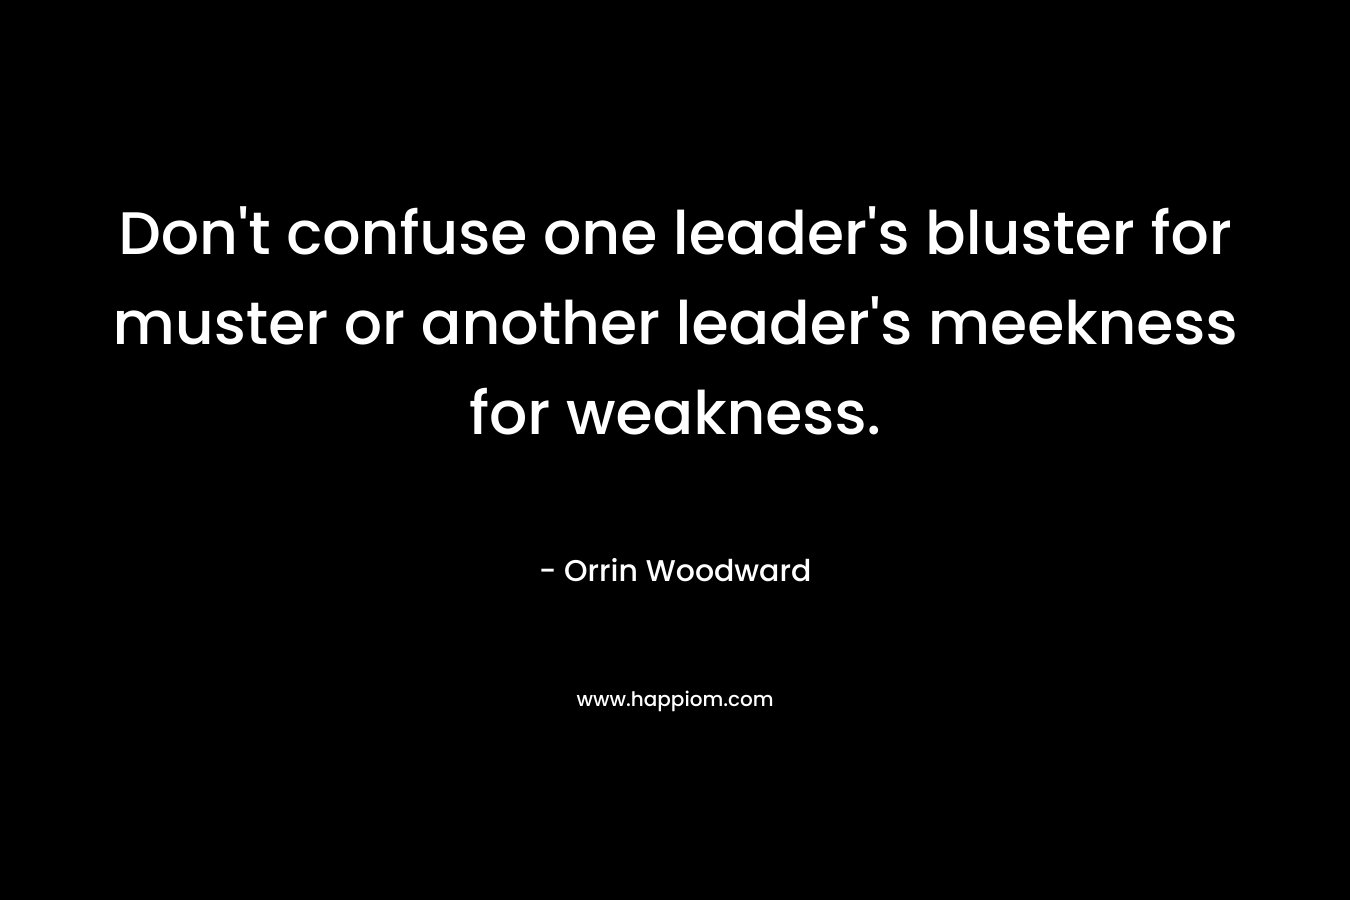 Don’t confuse one leader’s bluster for muster or another leader’s meekness for weakness. – Orrin Woodward